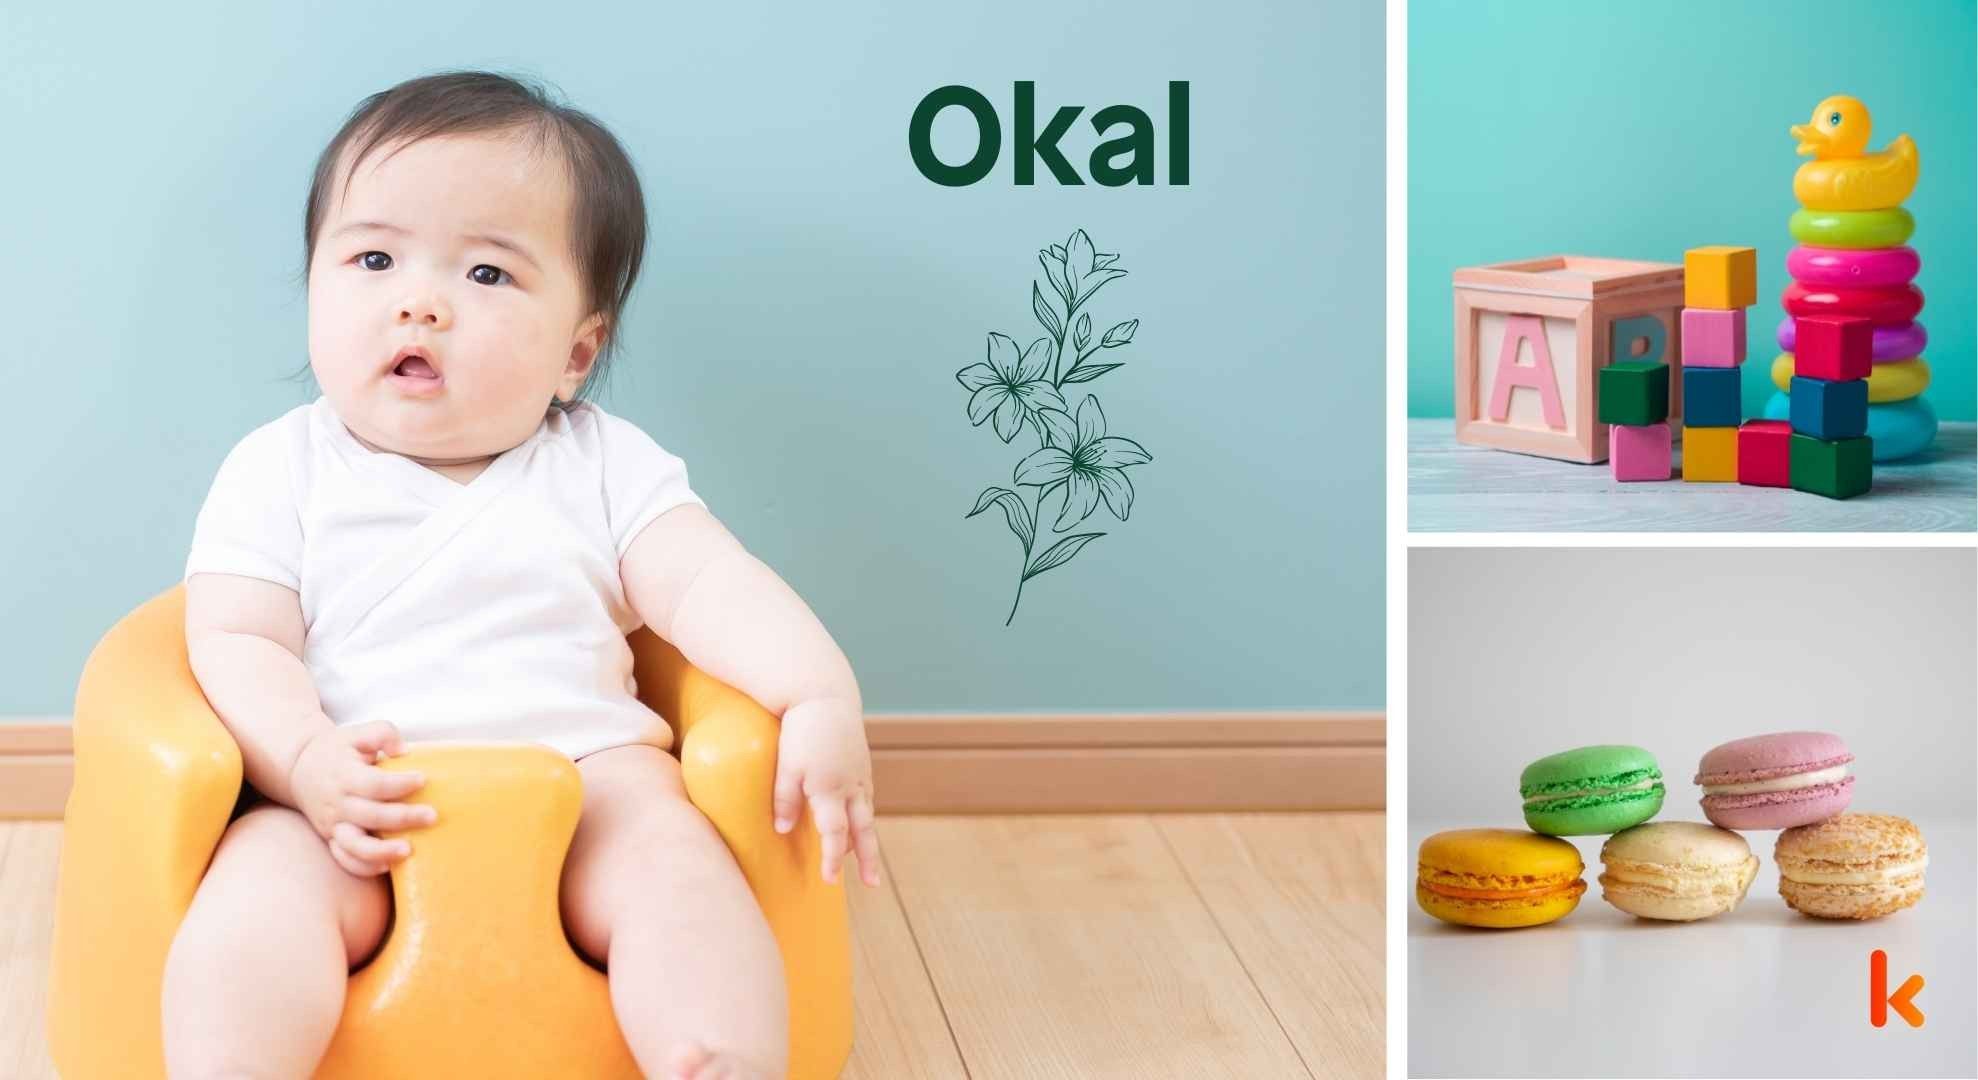 Meaning of the name Okal